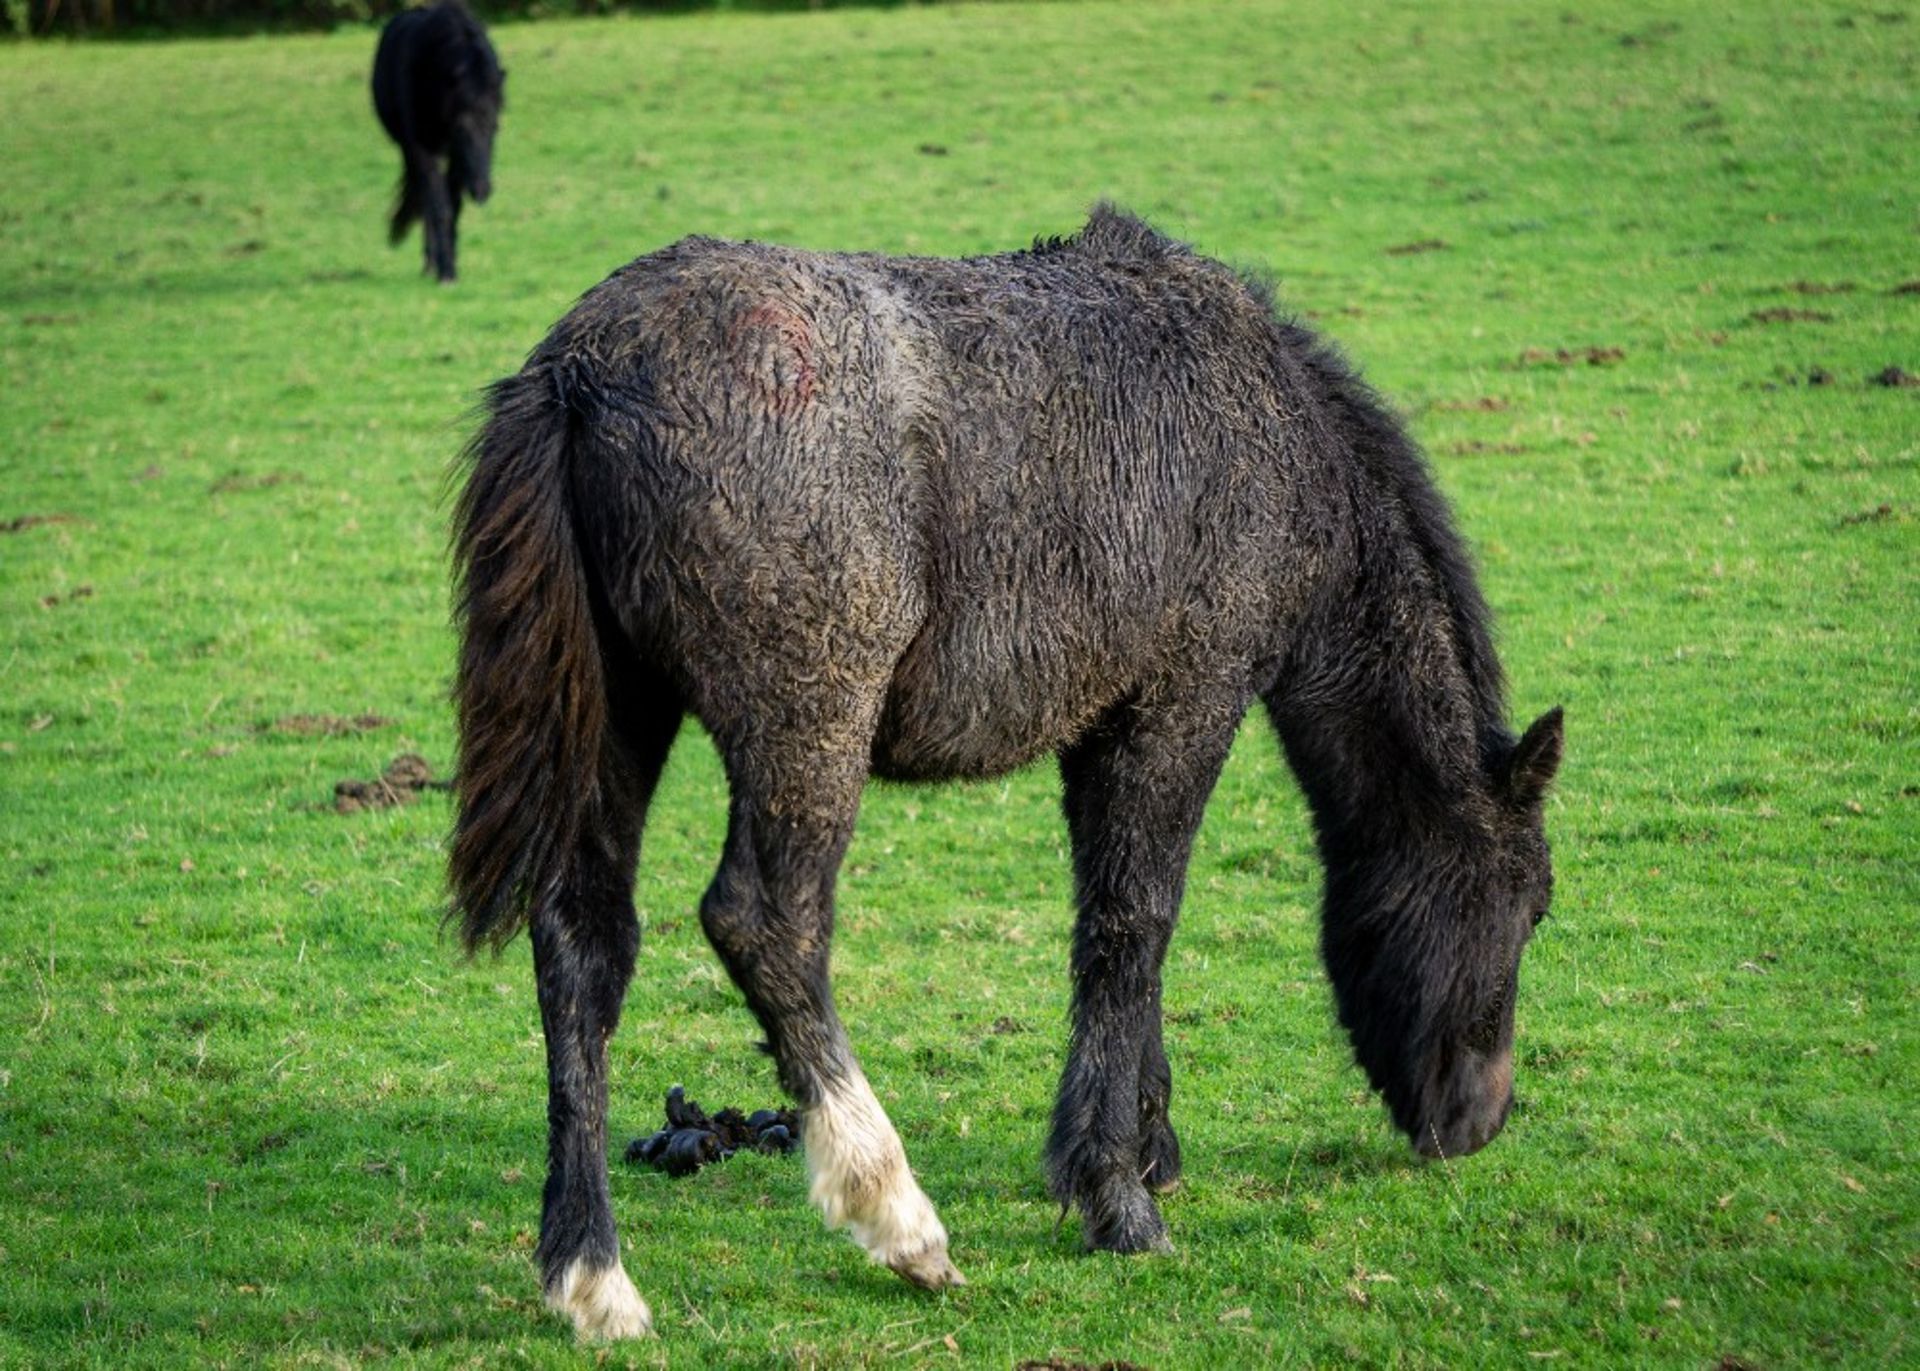 'LEIGH TOR' DARTMOOR HILL PONY IRON GREY FILLY FOAL - Image 2 of 4